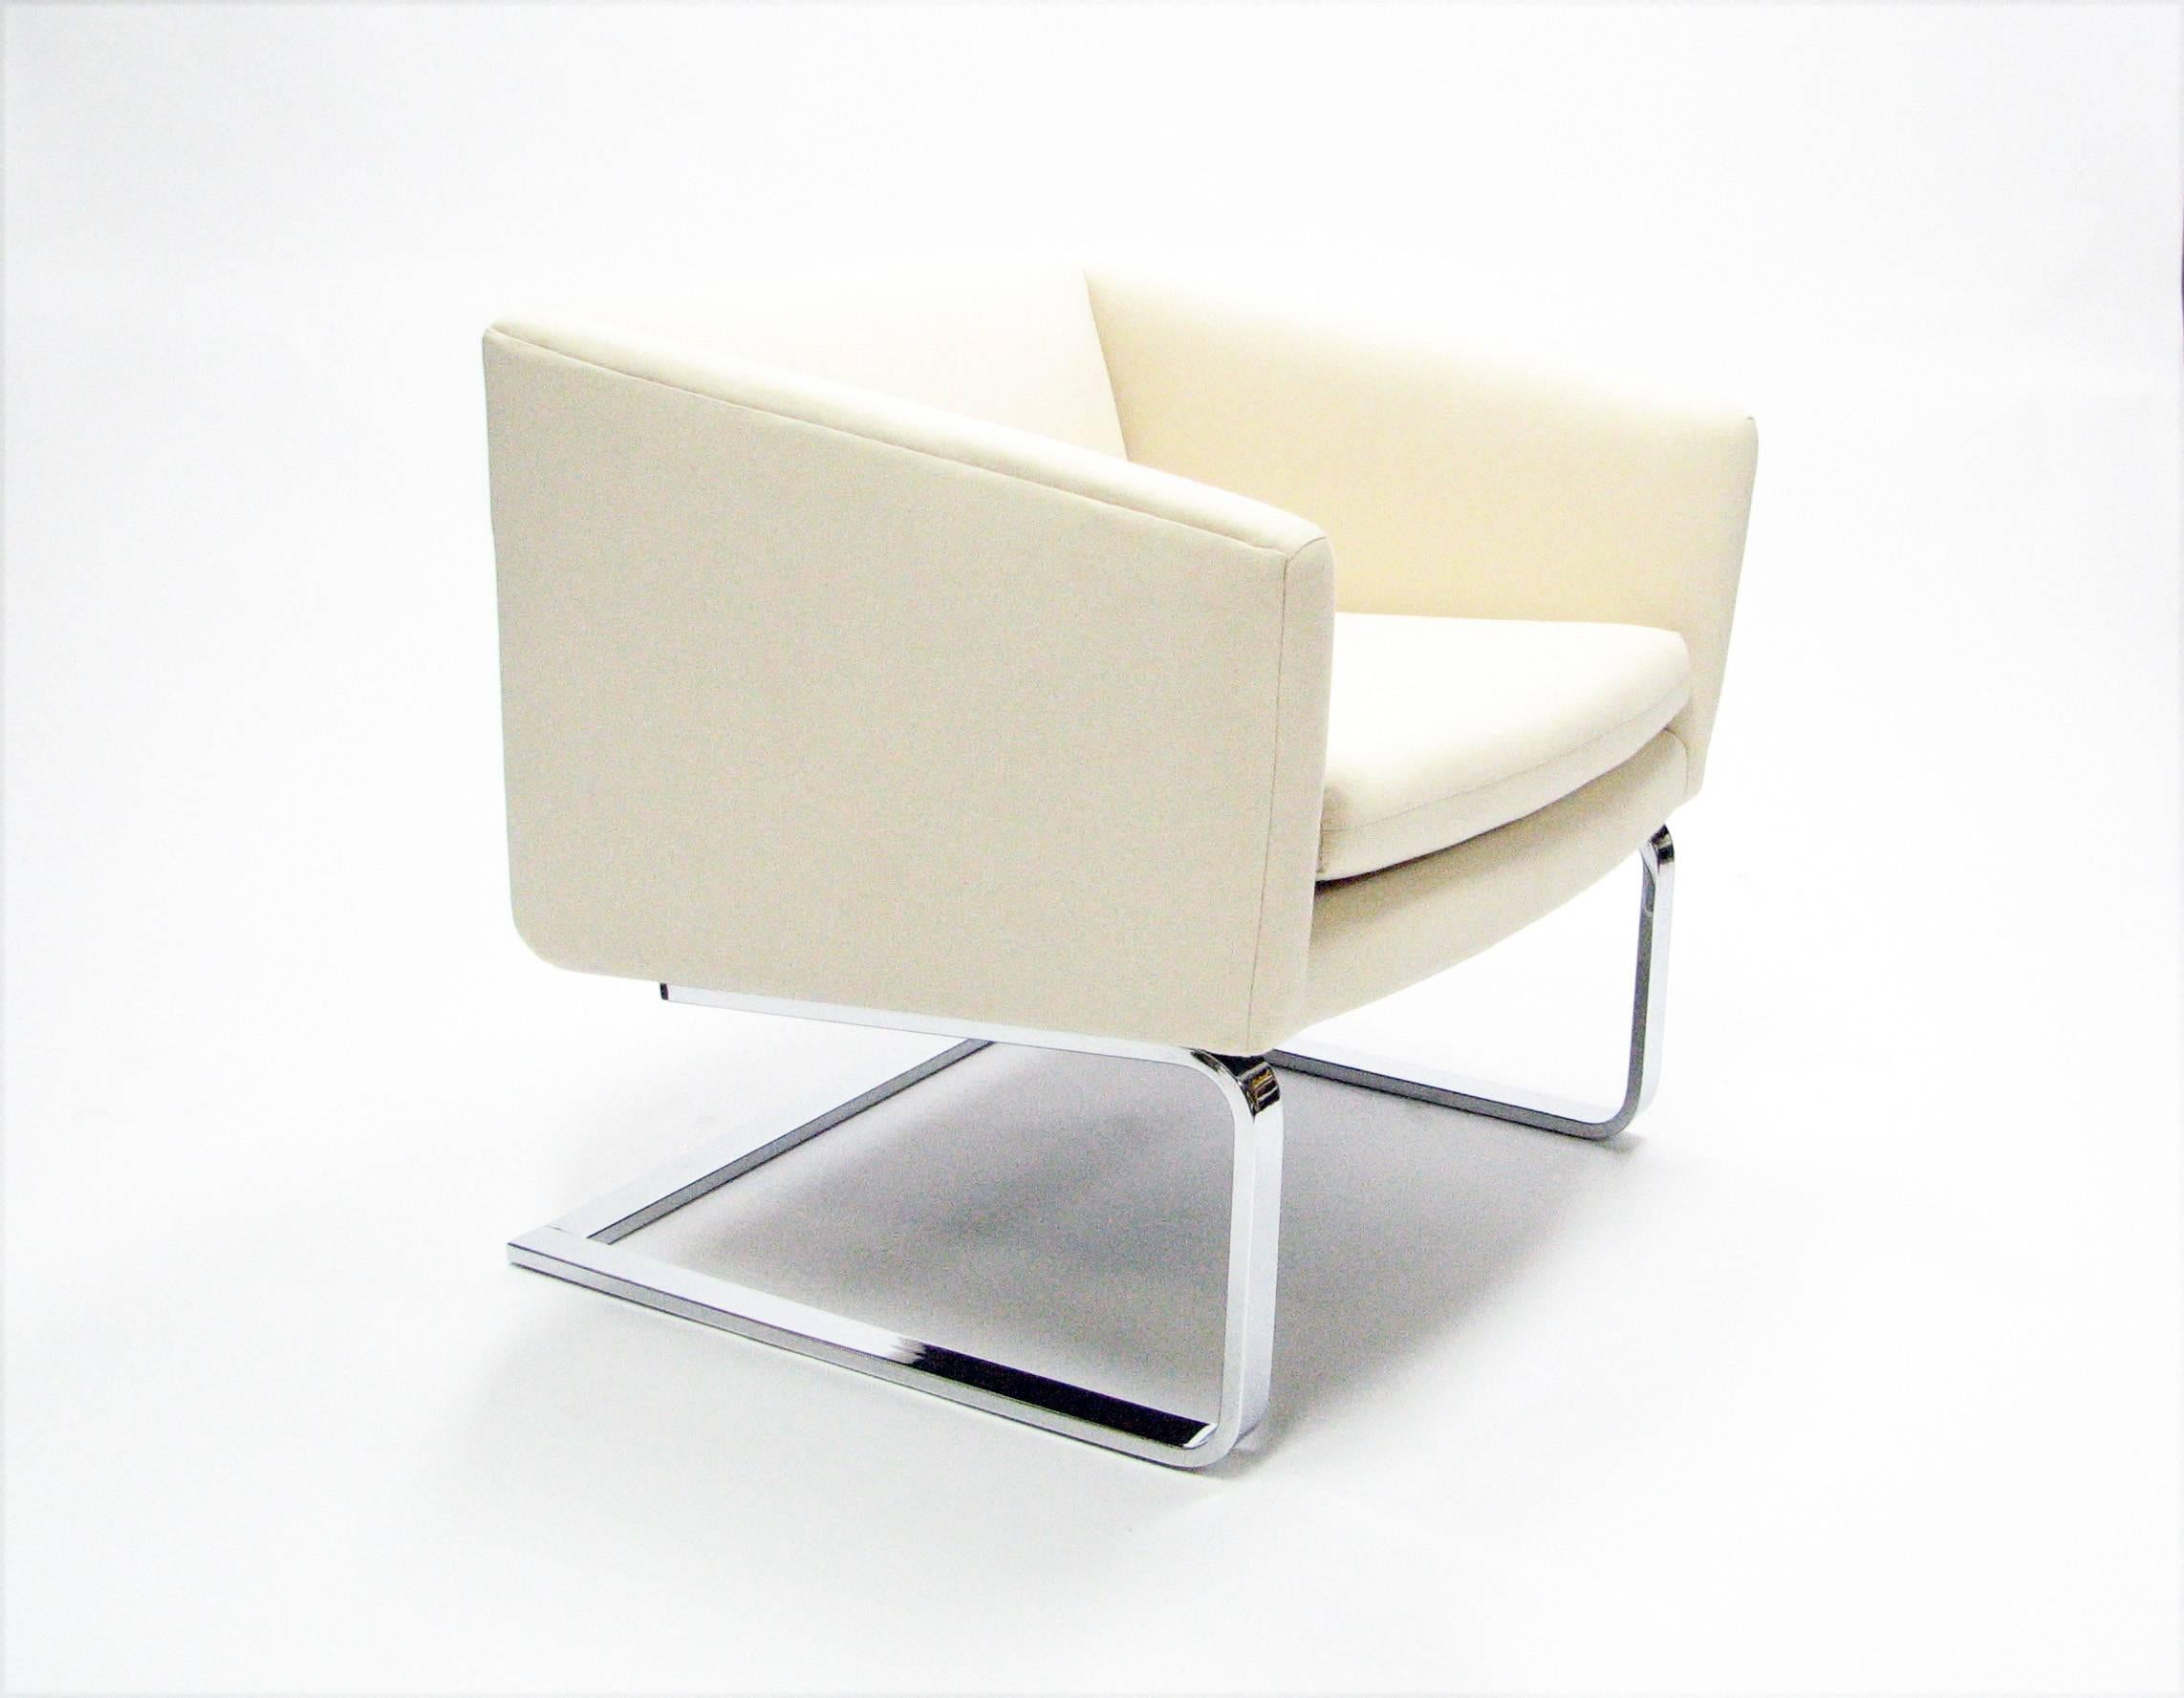 Sculptural Pair of Mid-Century Club Chairs with Chrome Bases and New Fabric In Excellent Condition For Sale In Portland, OR